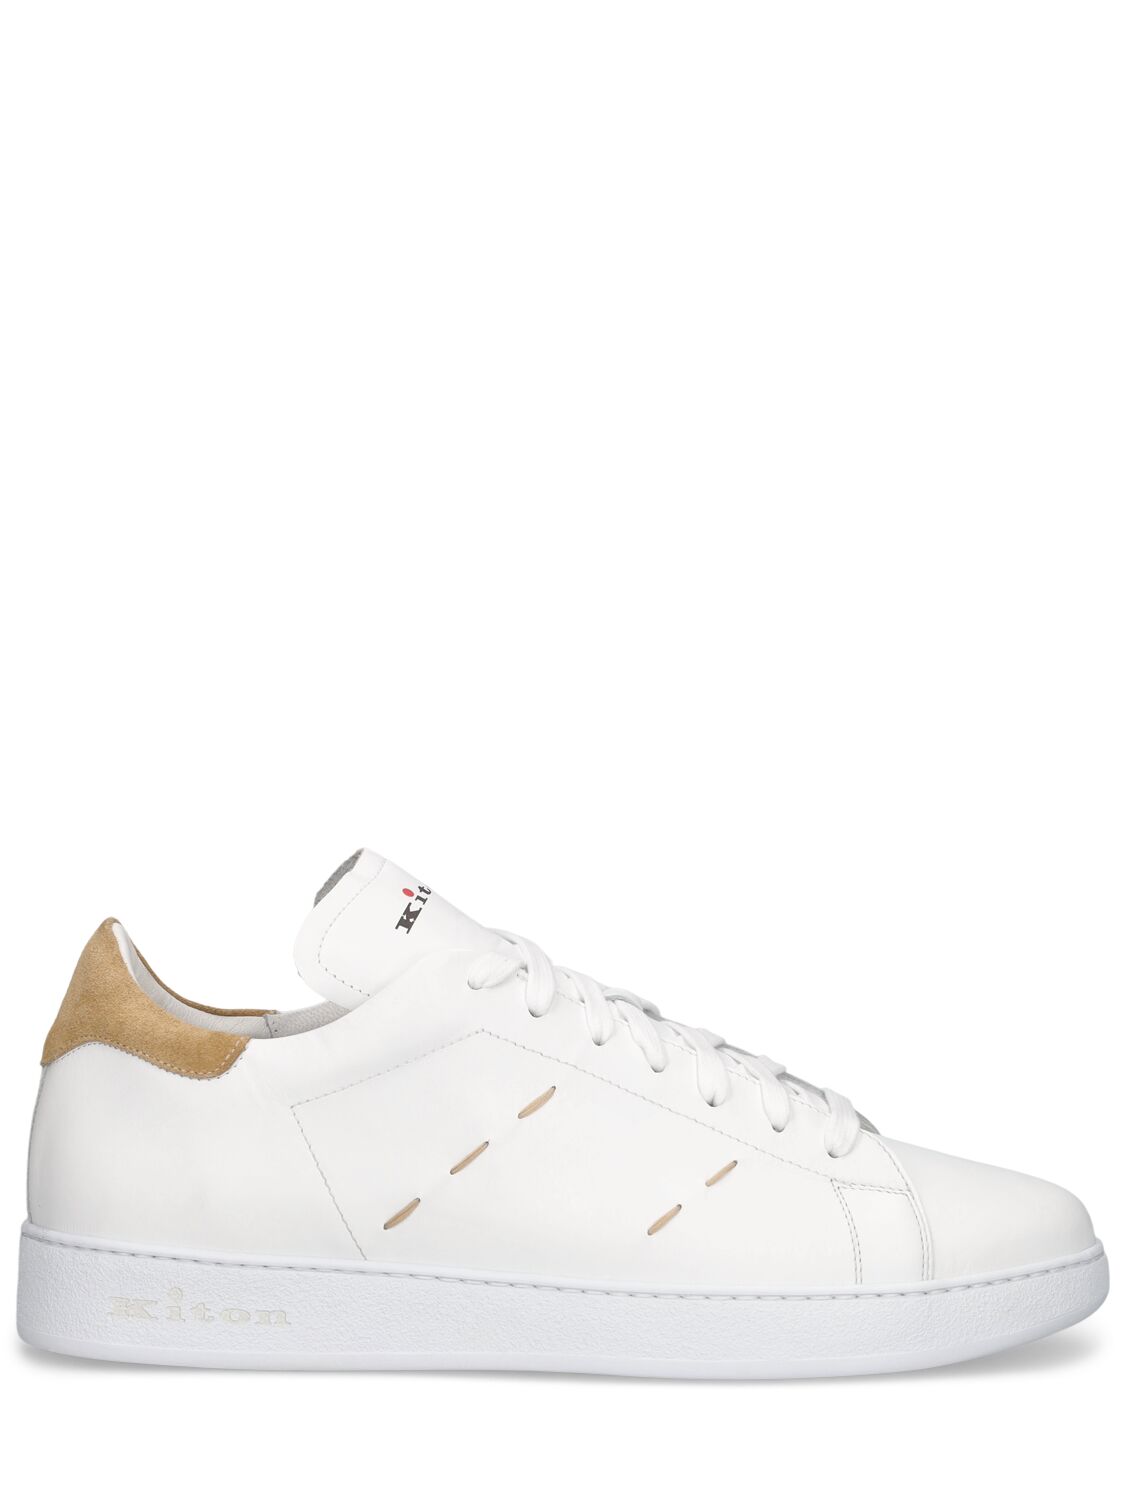 Kiton Leather Low Top Sneakers In White